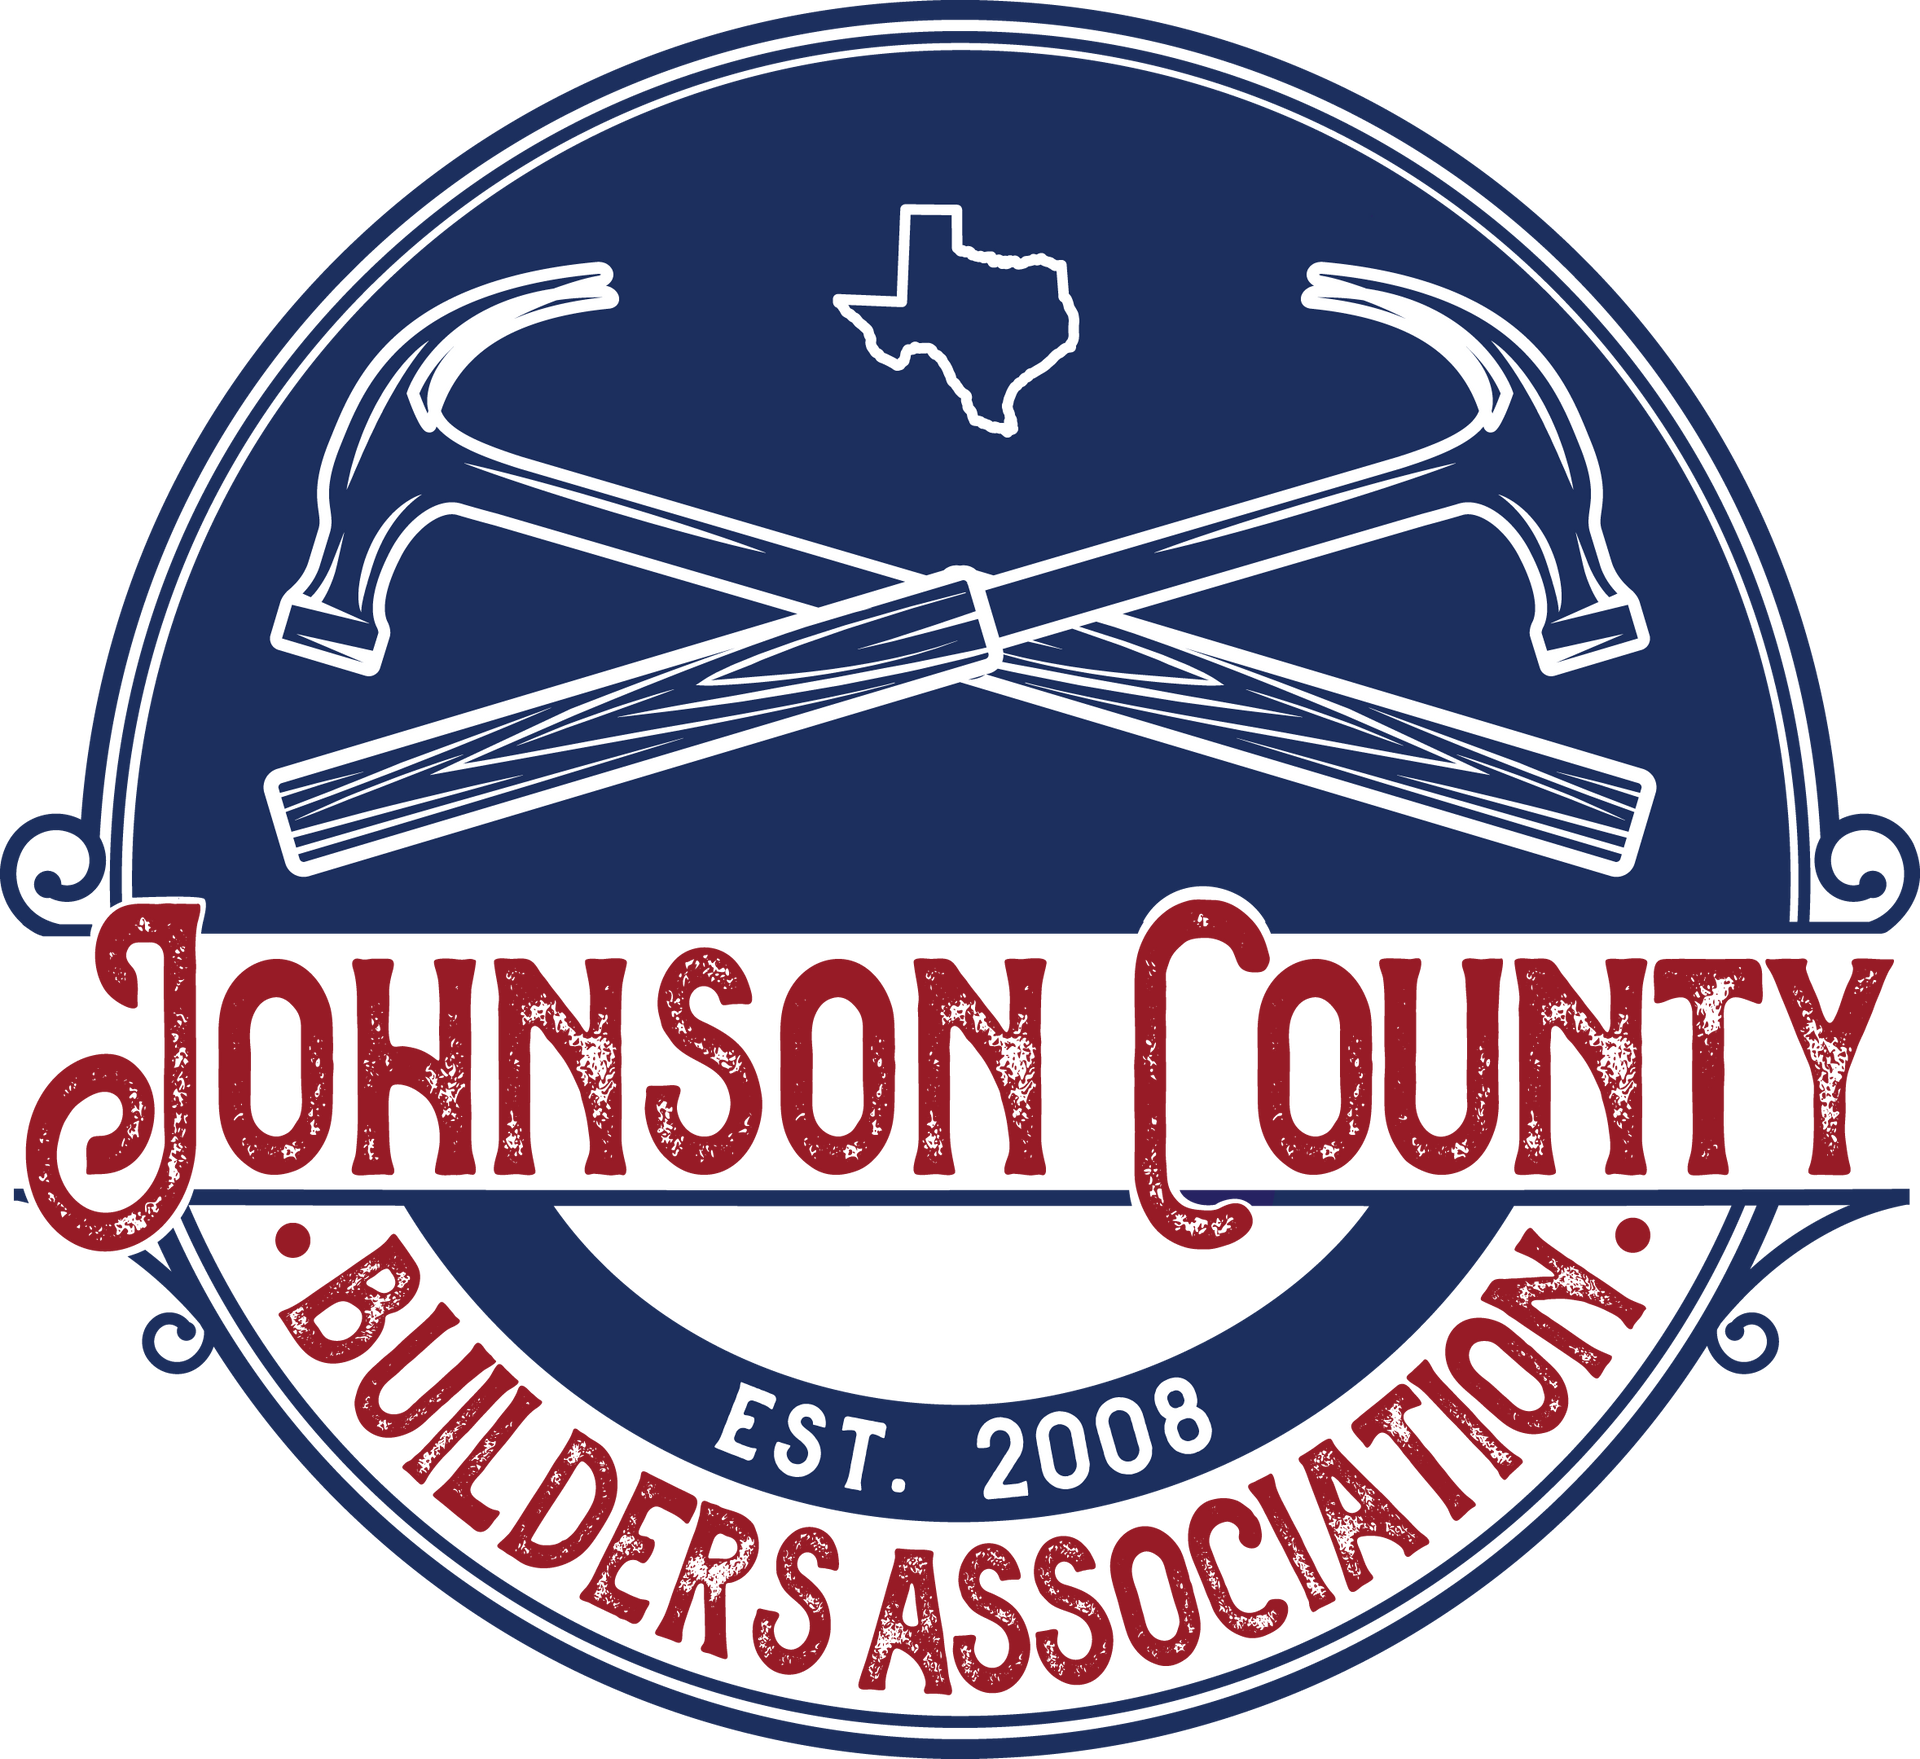 The logo for the johnson county builders association